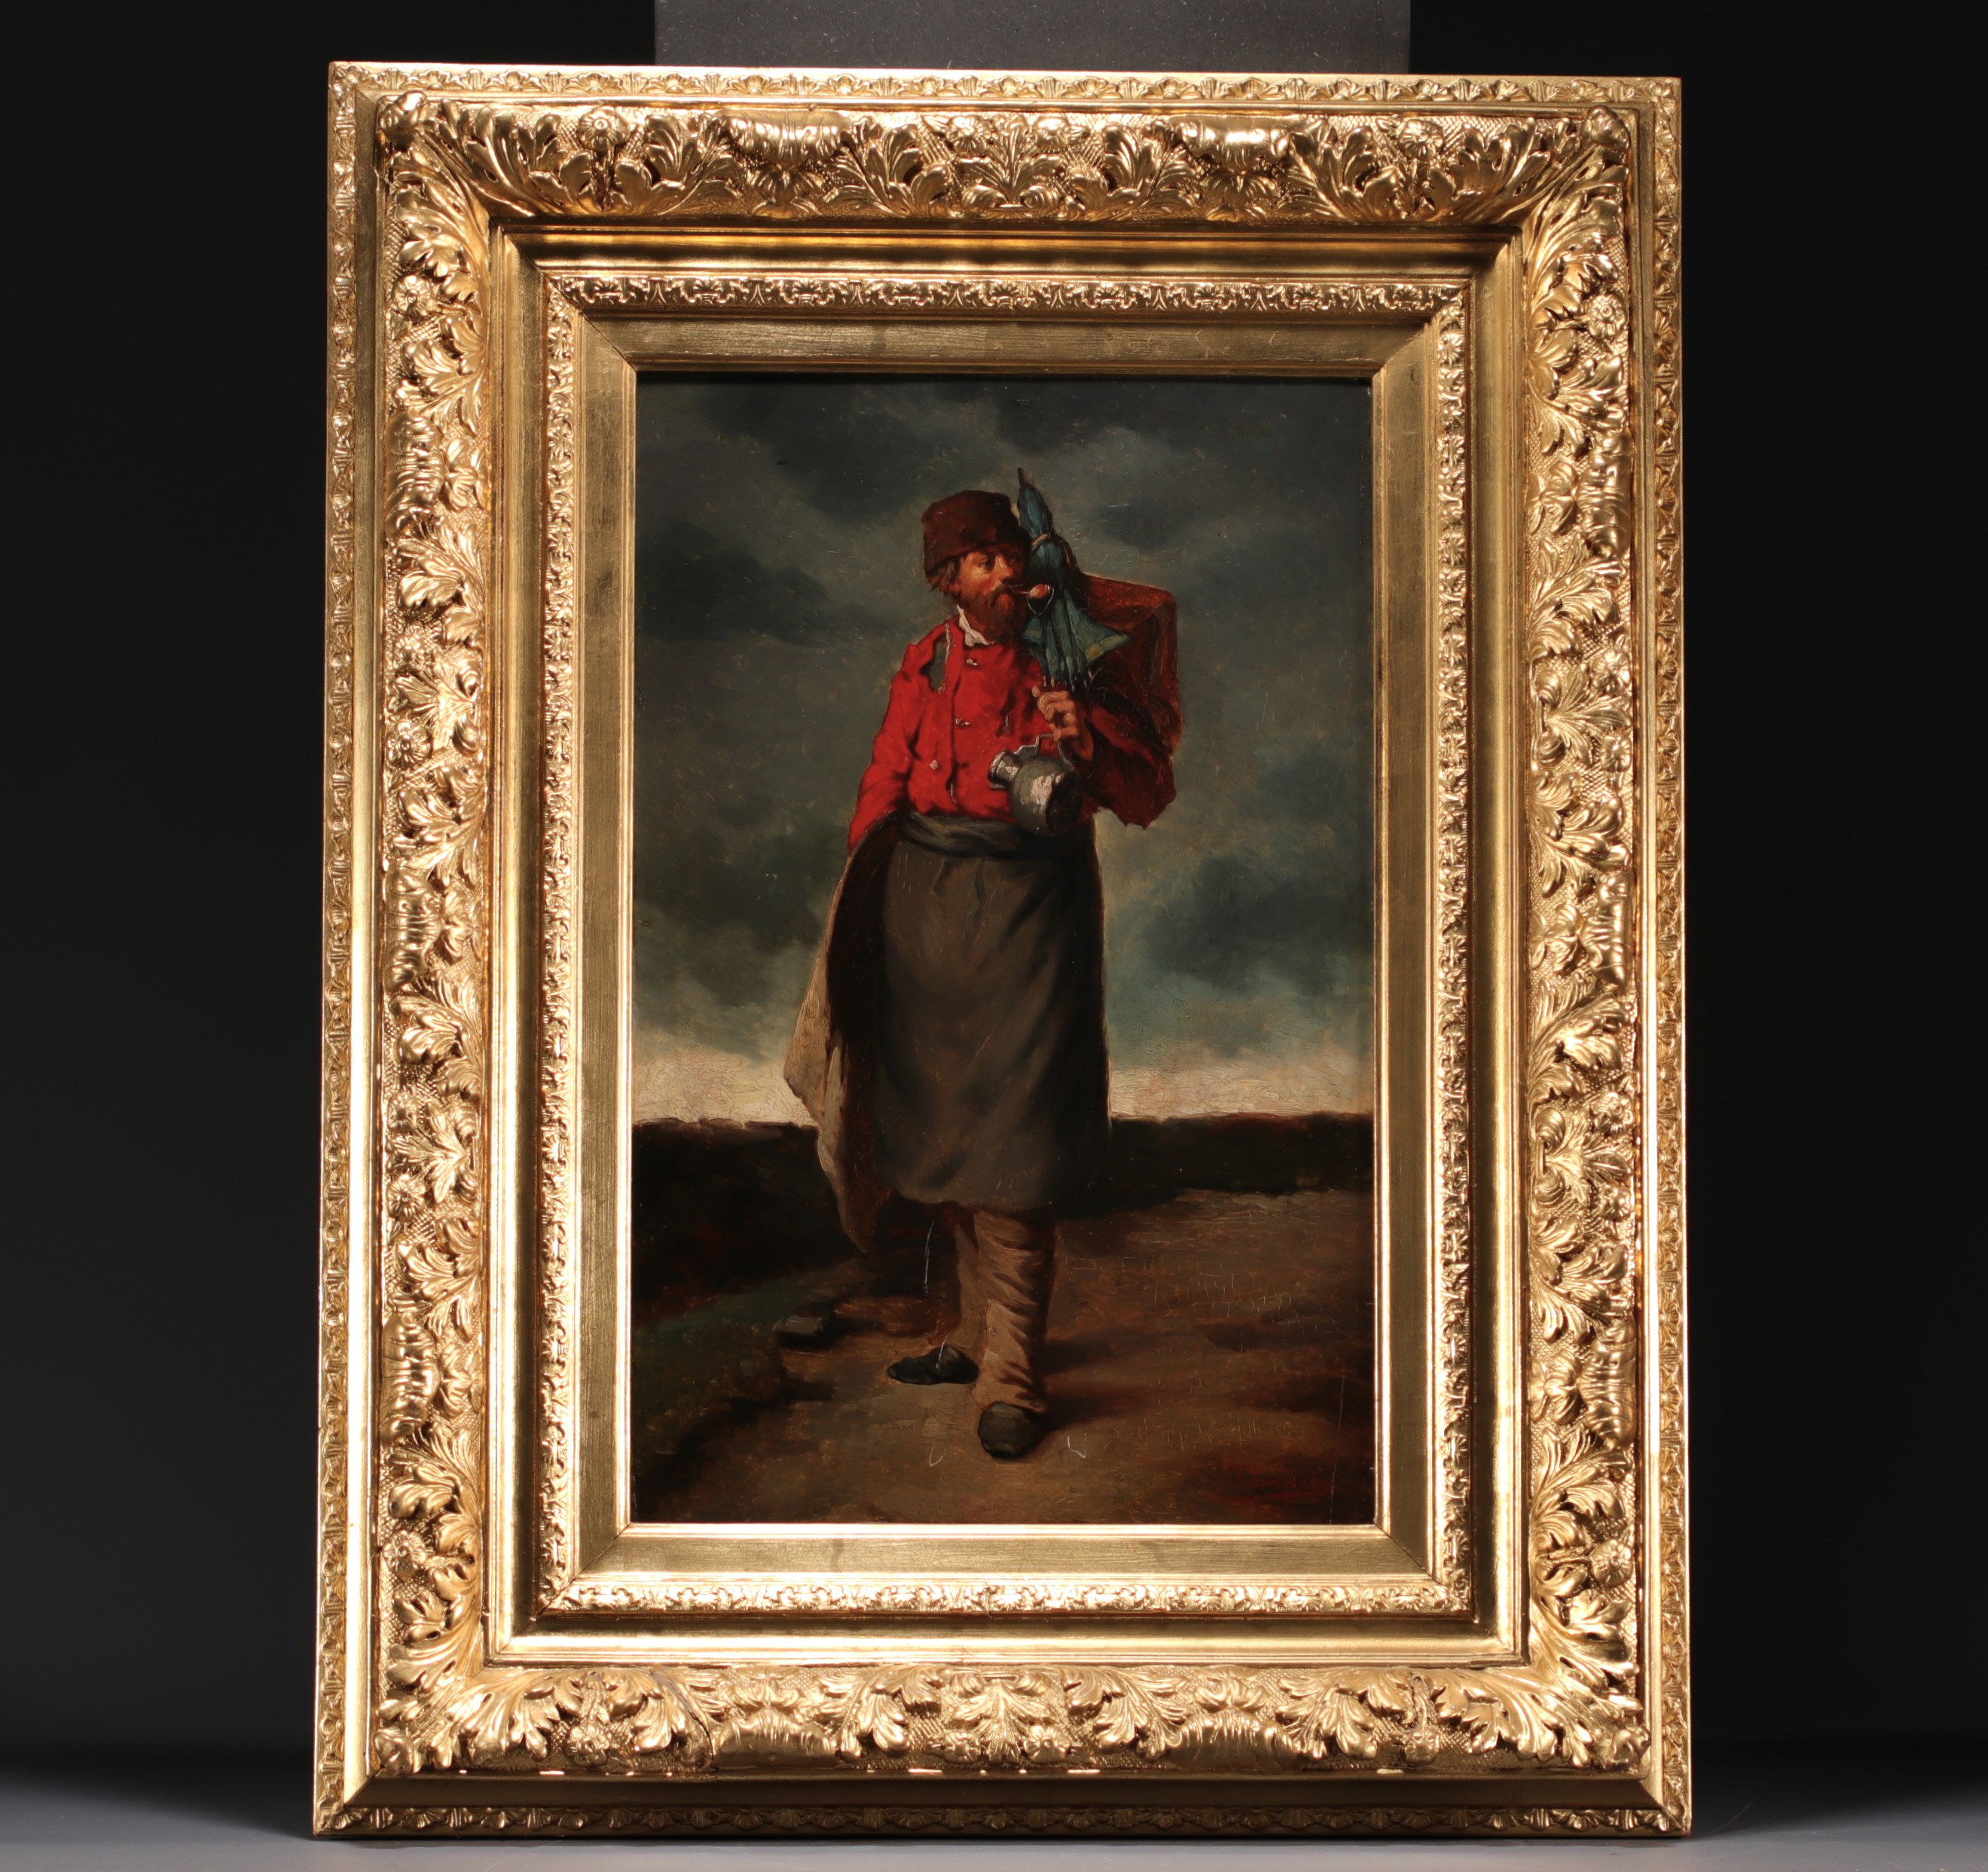 Josse IMPENS (1840-1905) "Soldier in the field" Oil on panel, 19th century. - Image 2 of 2